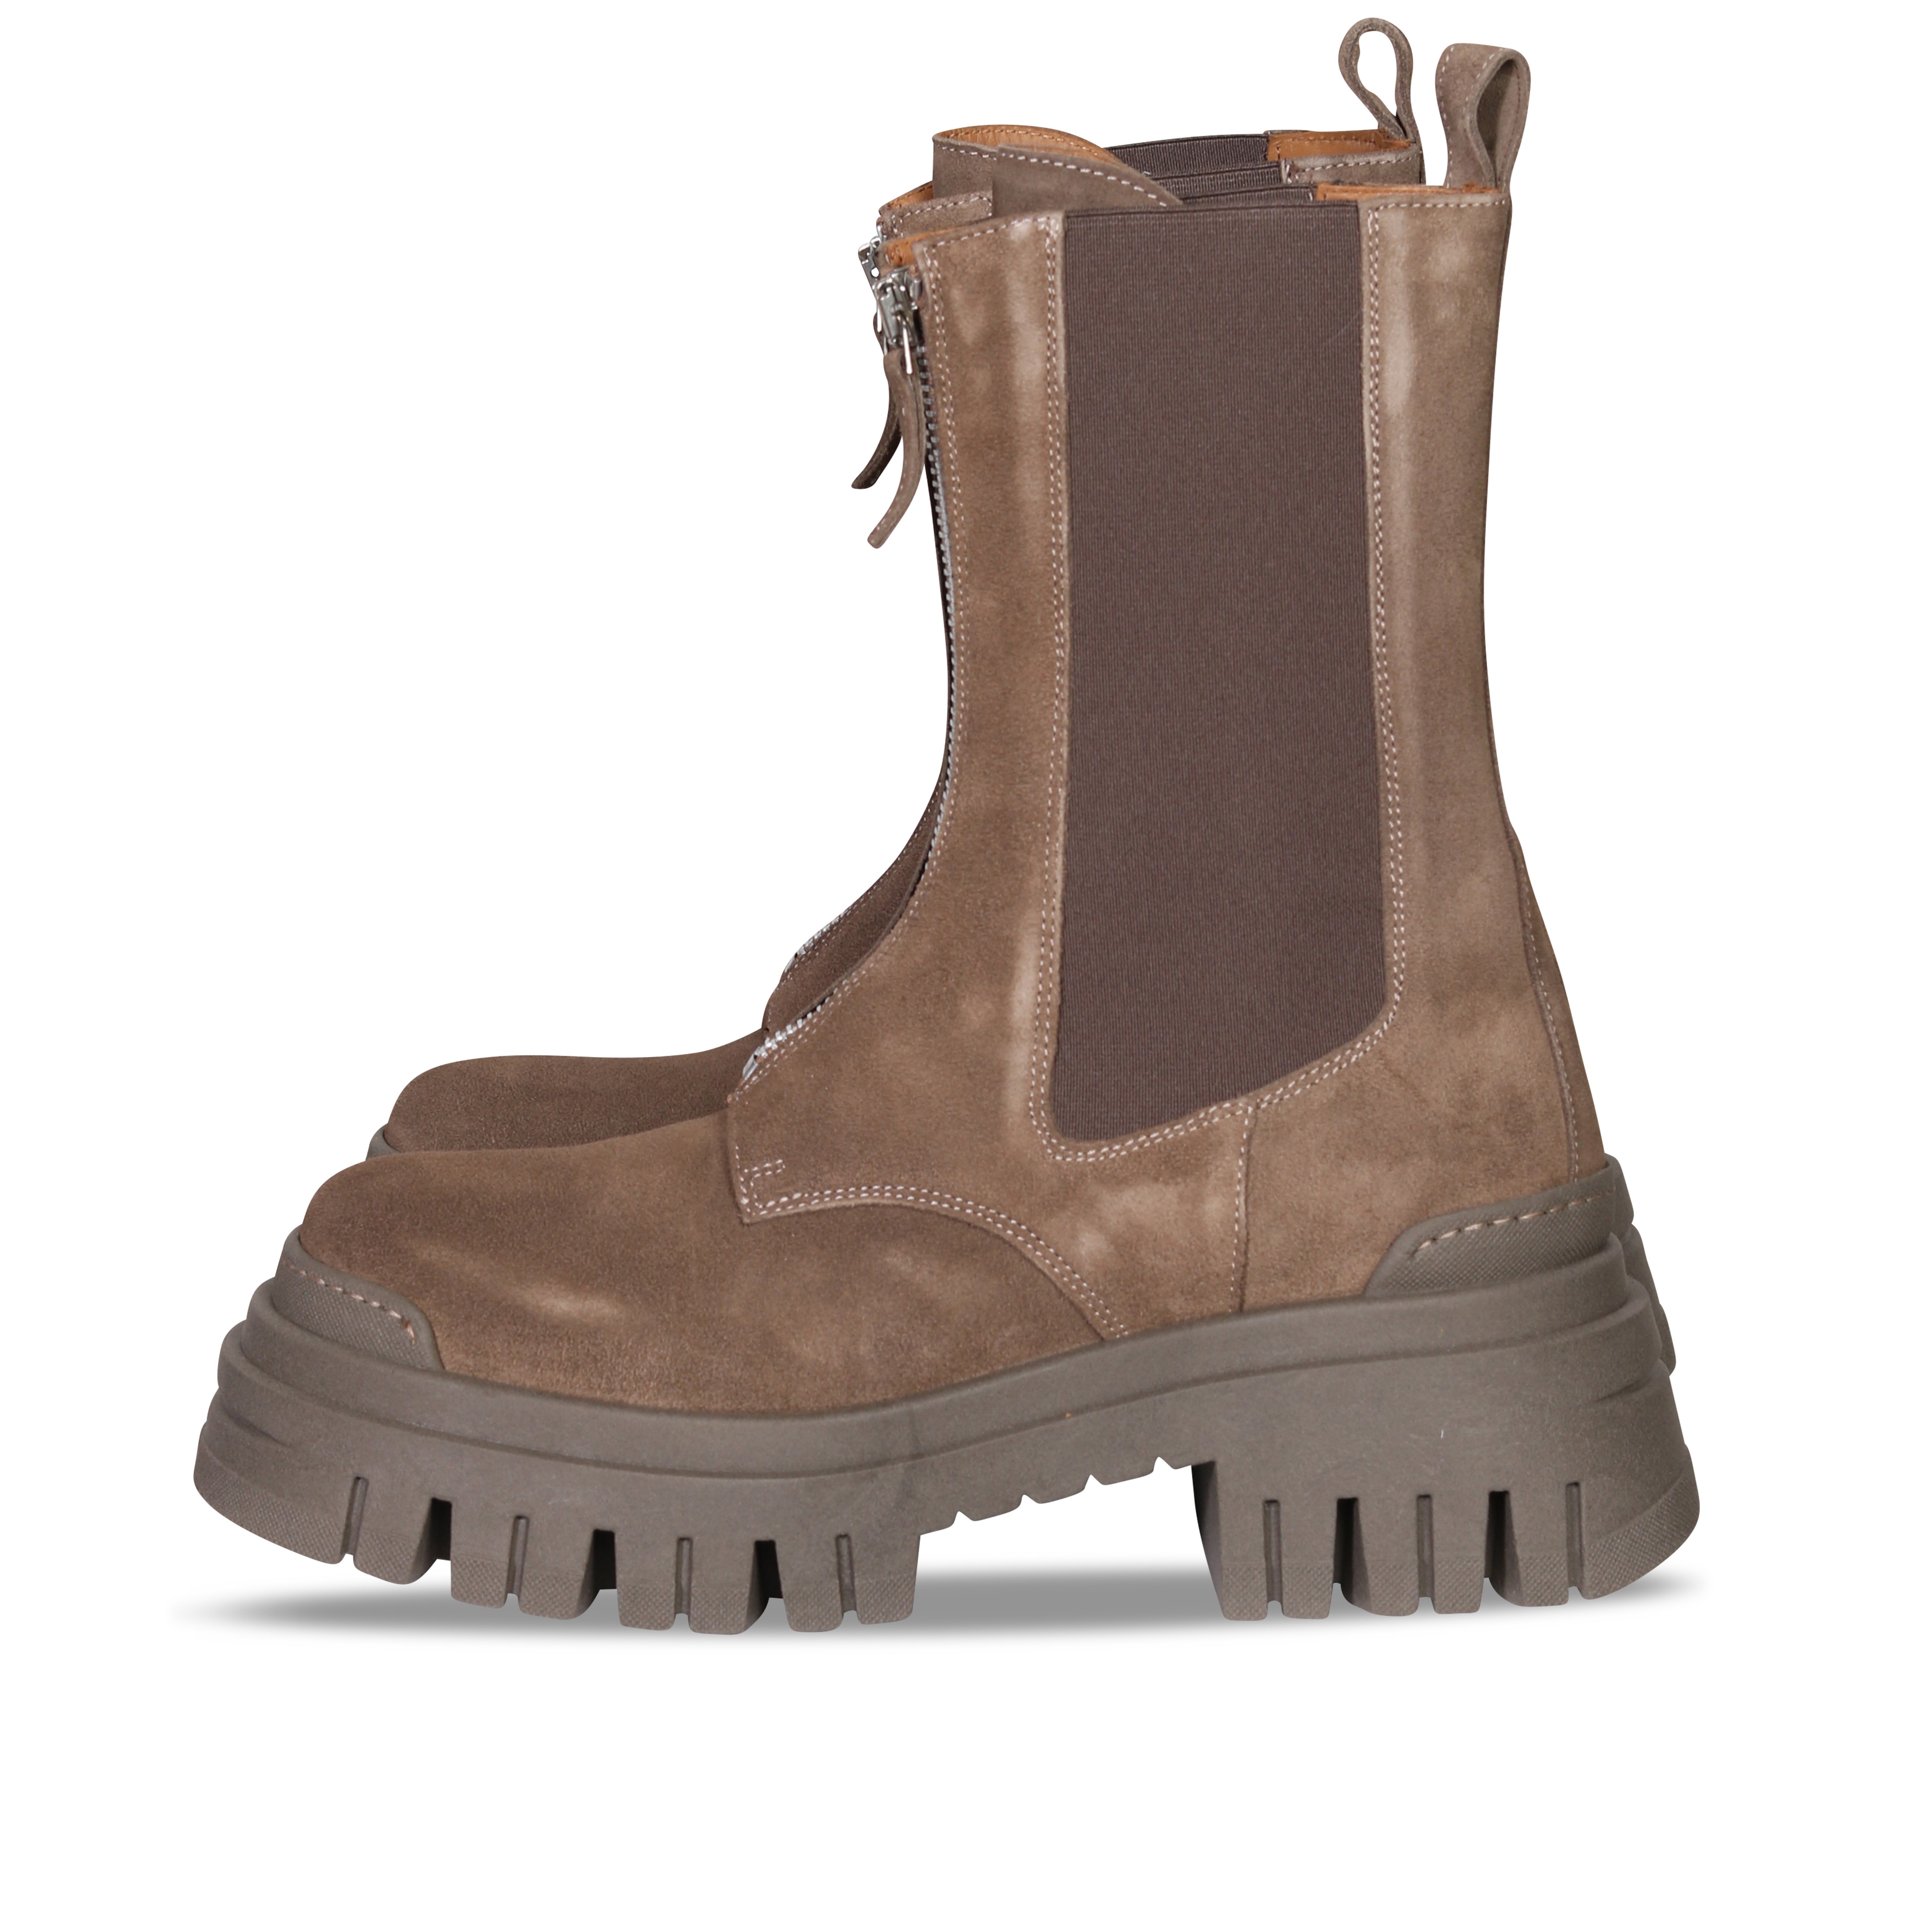 Ennequadro Suede Combat Boots in Taupe with Zip